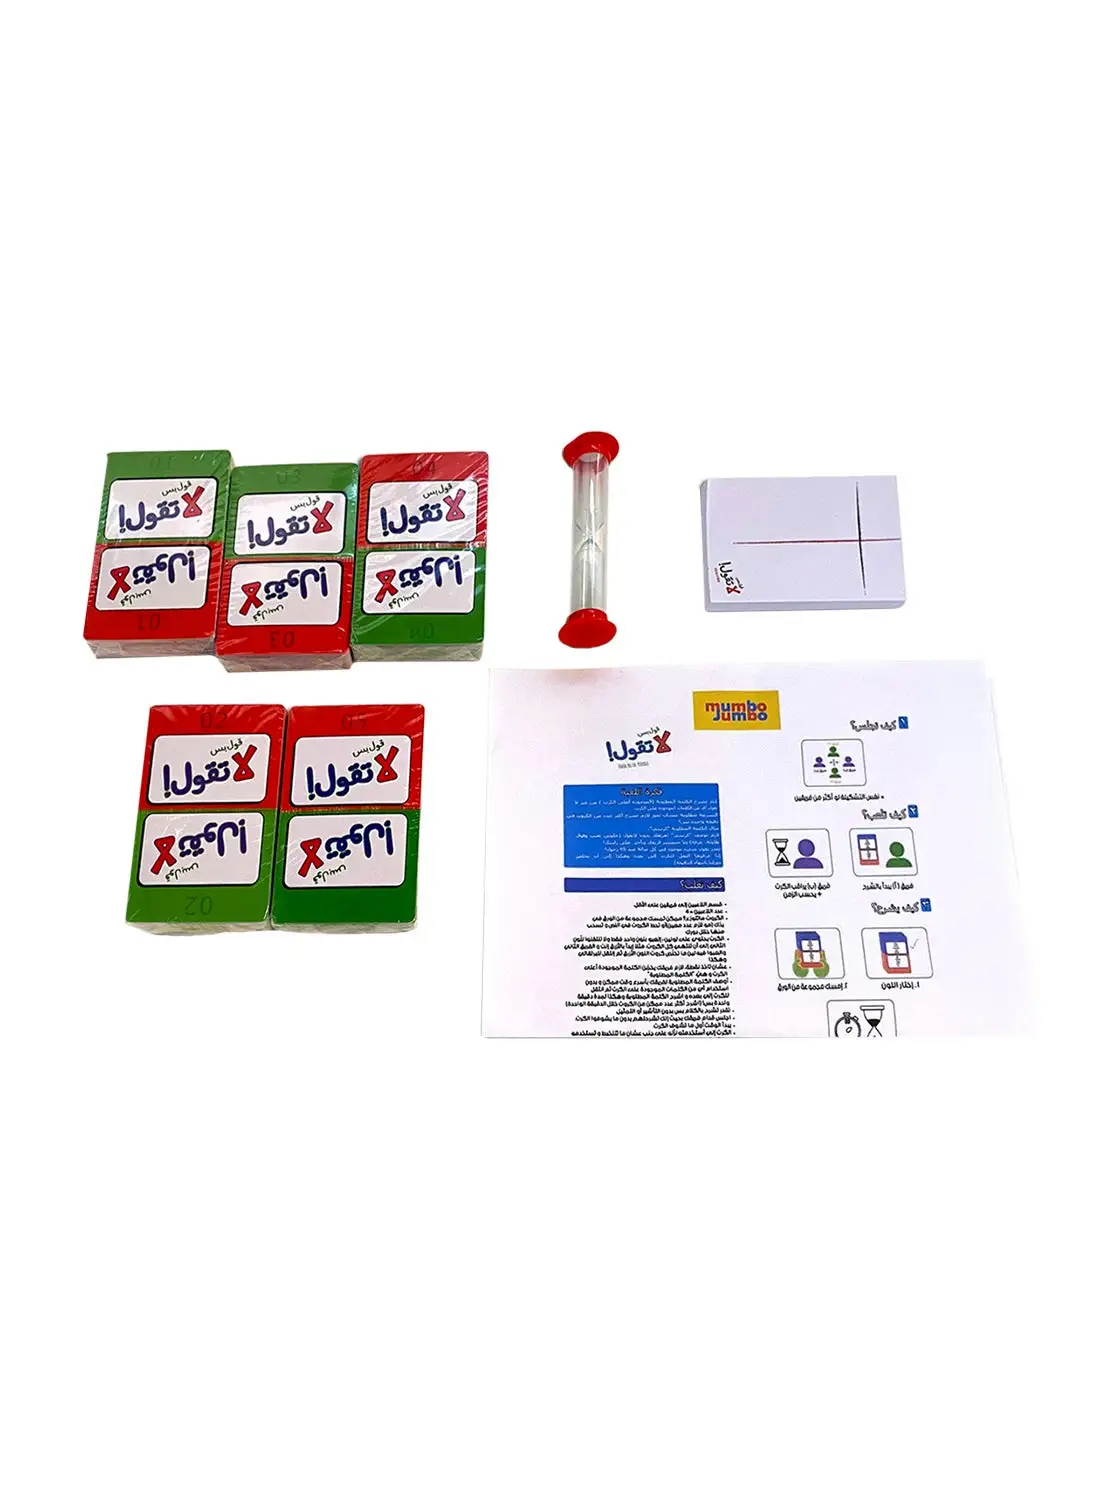 mumbo Jumbo Arabic Gool Bsla Tgool - Time Card Game- Small, For Kids 12 Years And Above, Learn All About Time With No Difficulty, Easy To Understand With Graphic Design Features 20.5 x 26.5 x 5.5cm